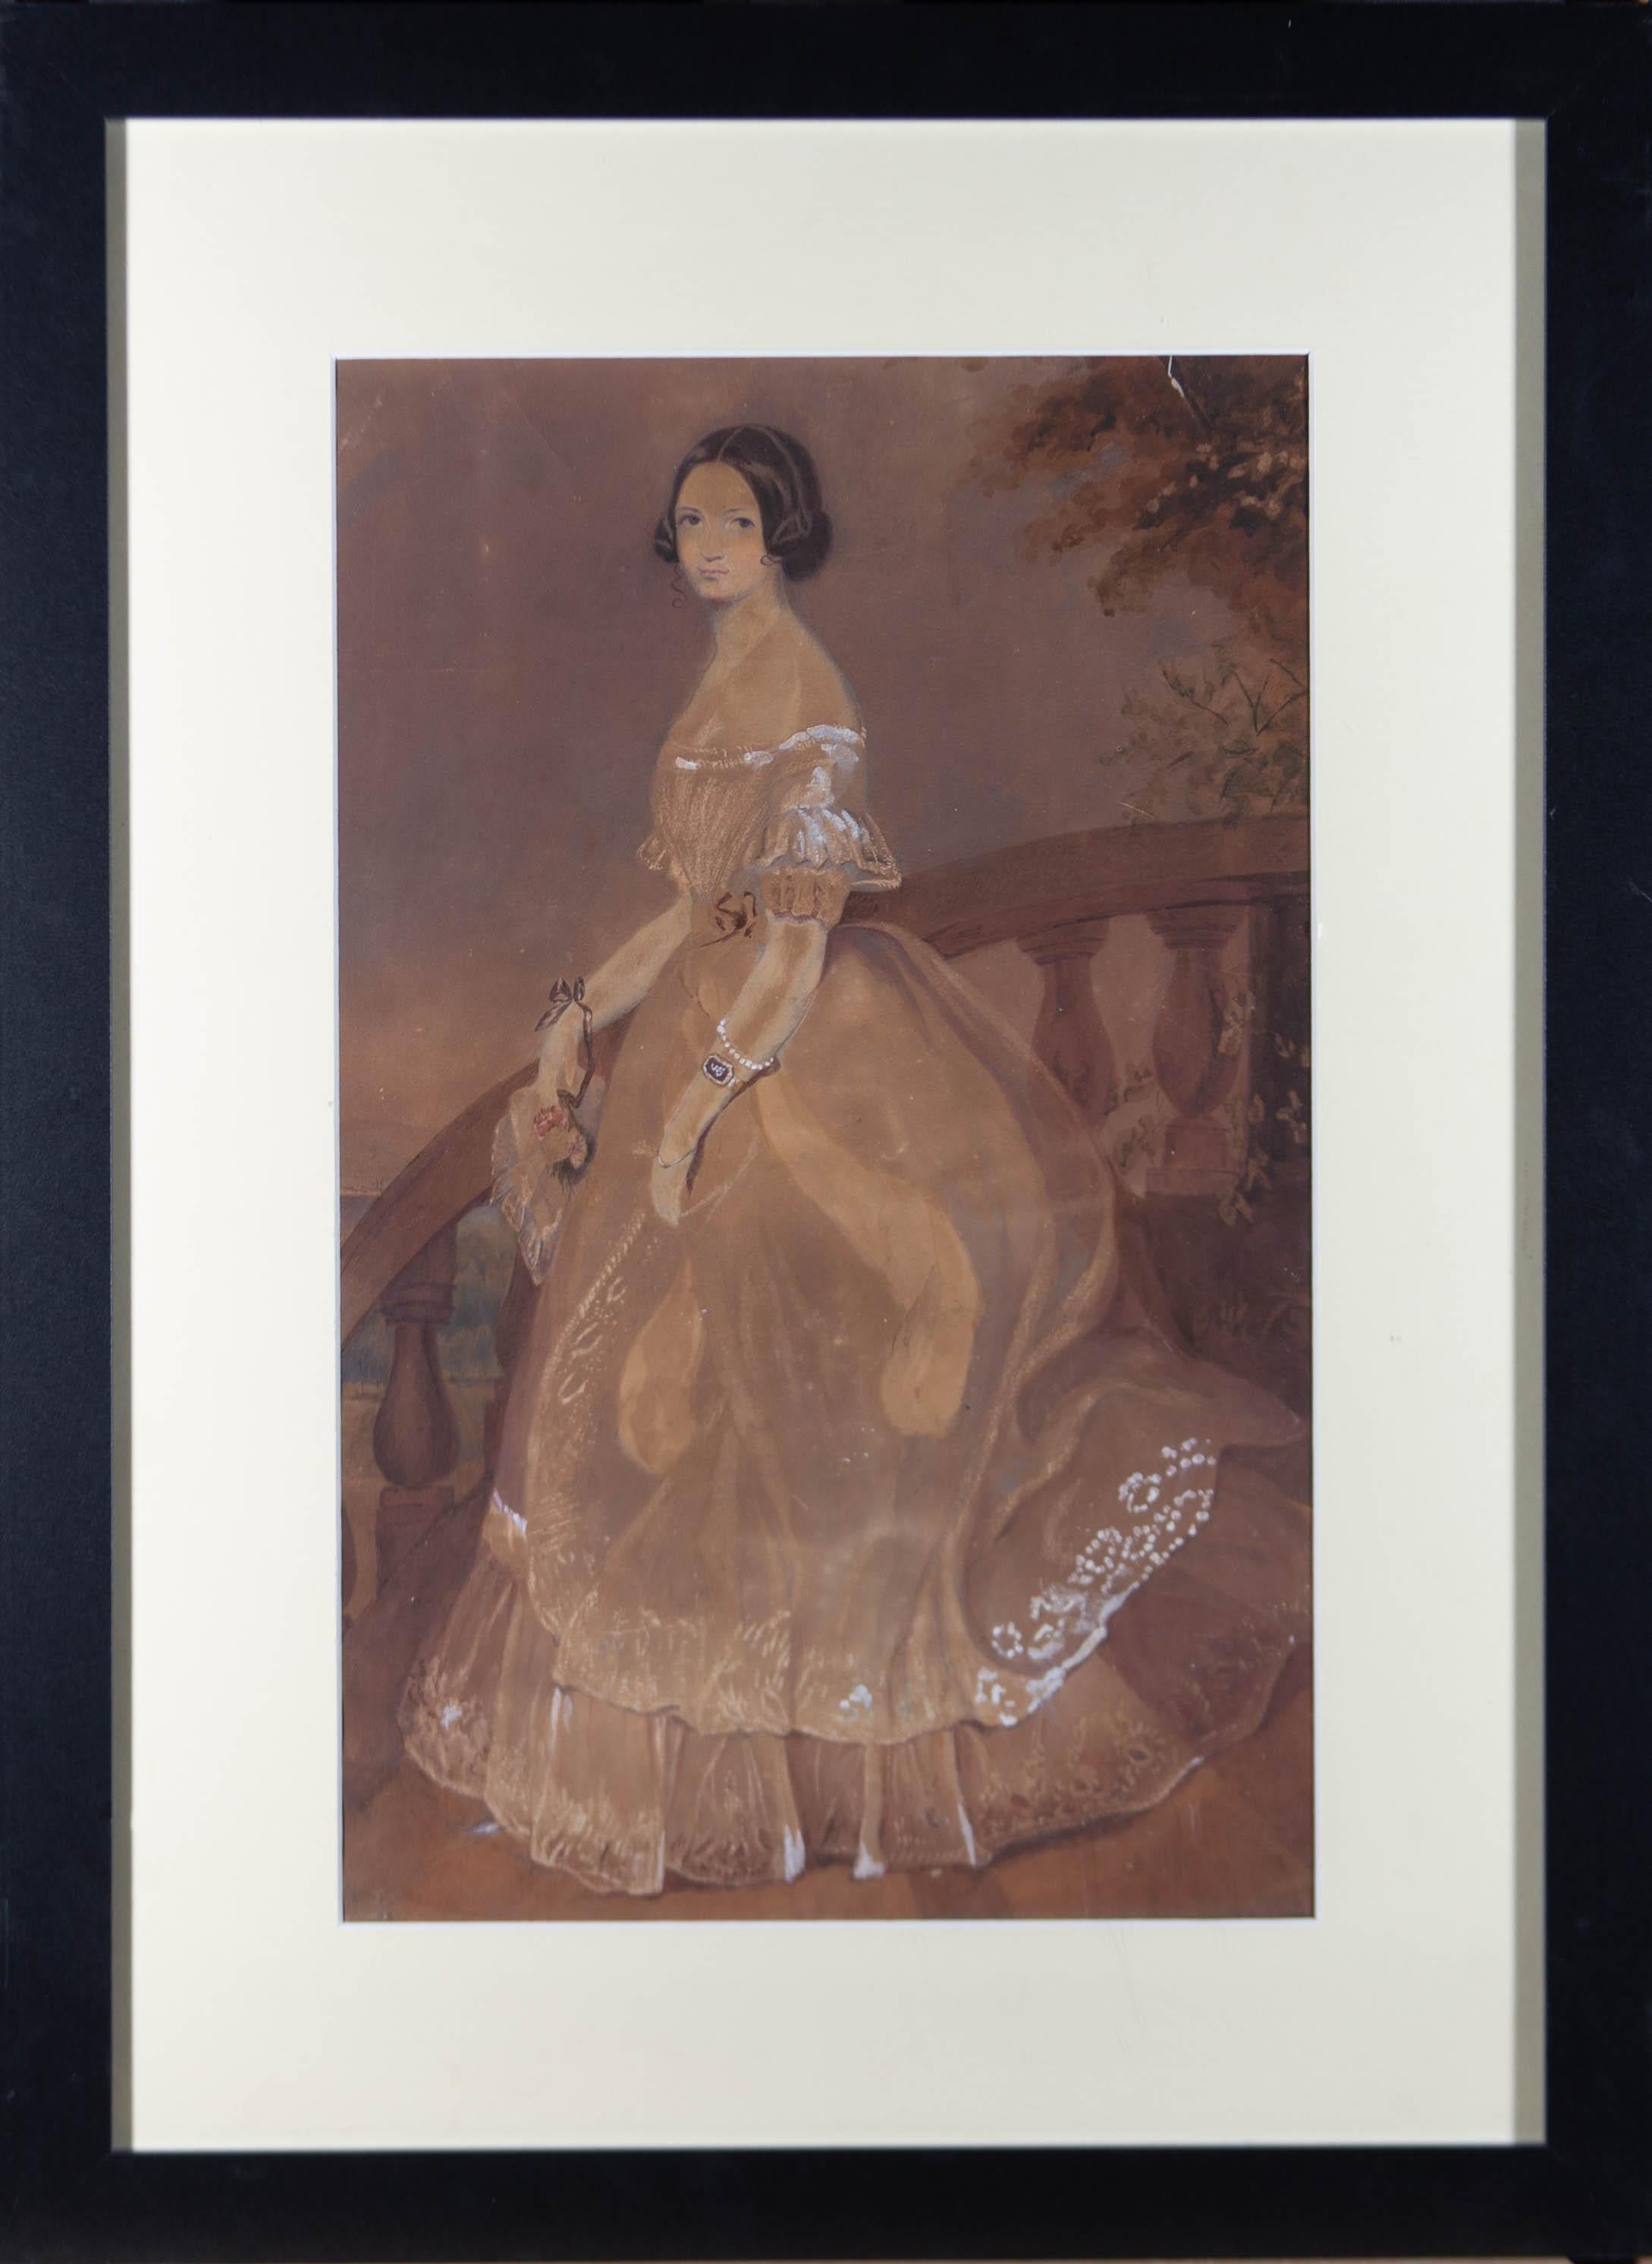 A fine watercolour full body portrait of a beautiful, young debutante in a ball gown and pearl jewelry. The young lady is descending a curved stone staircase, resting on the balustrade. The artist has used an unusual technique of pin pricks to the